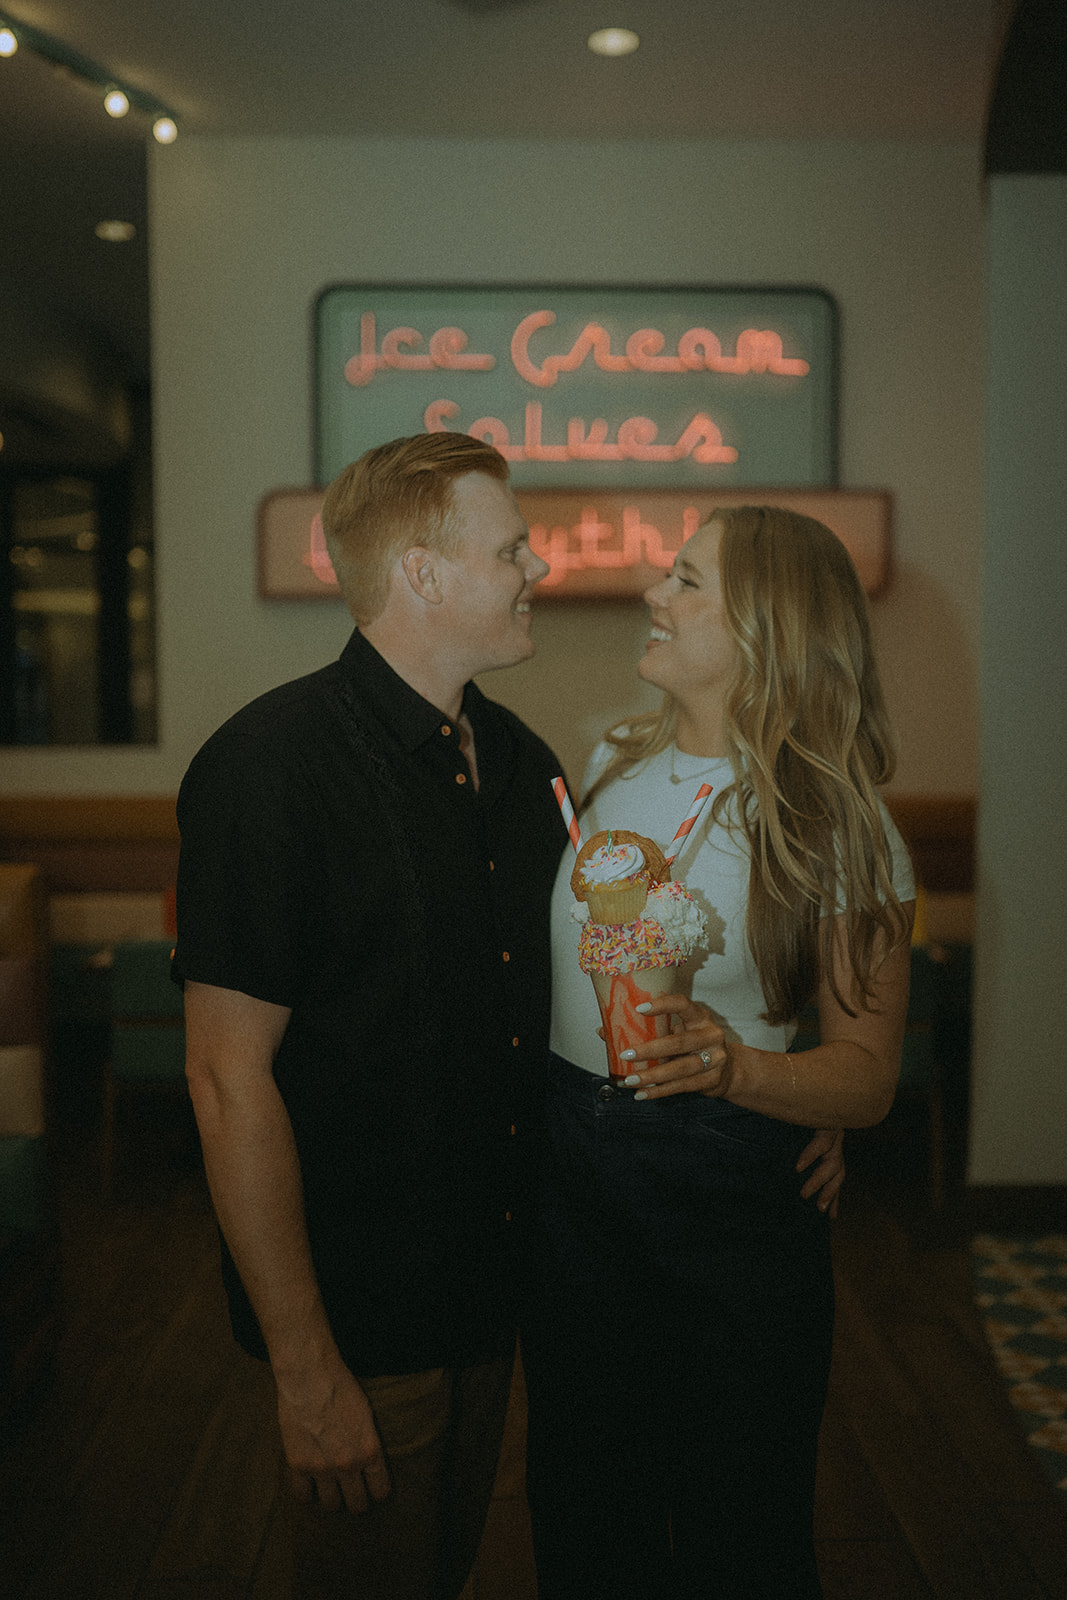 St. Louis Engagement Session at The Last Hotel + Union Station